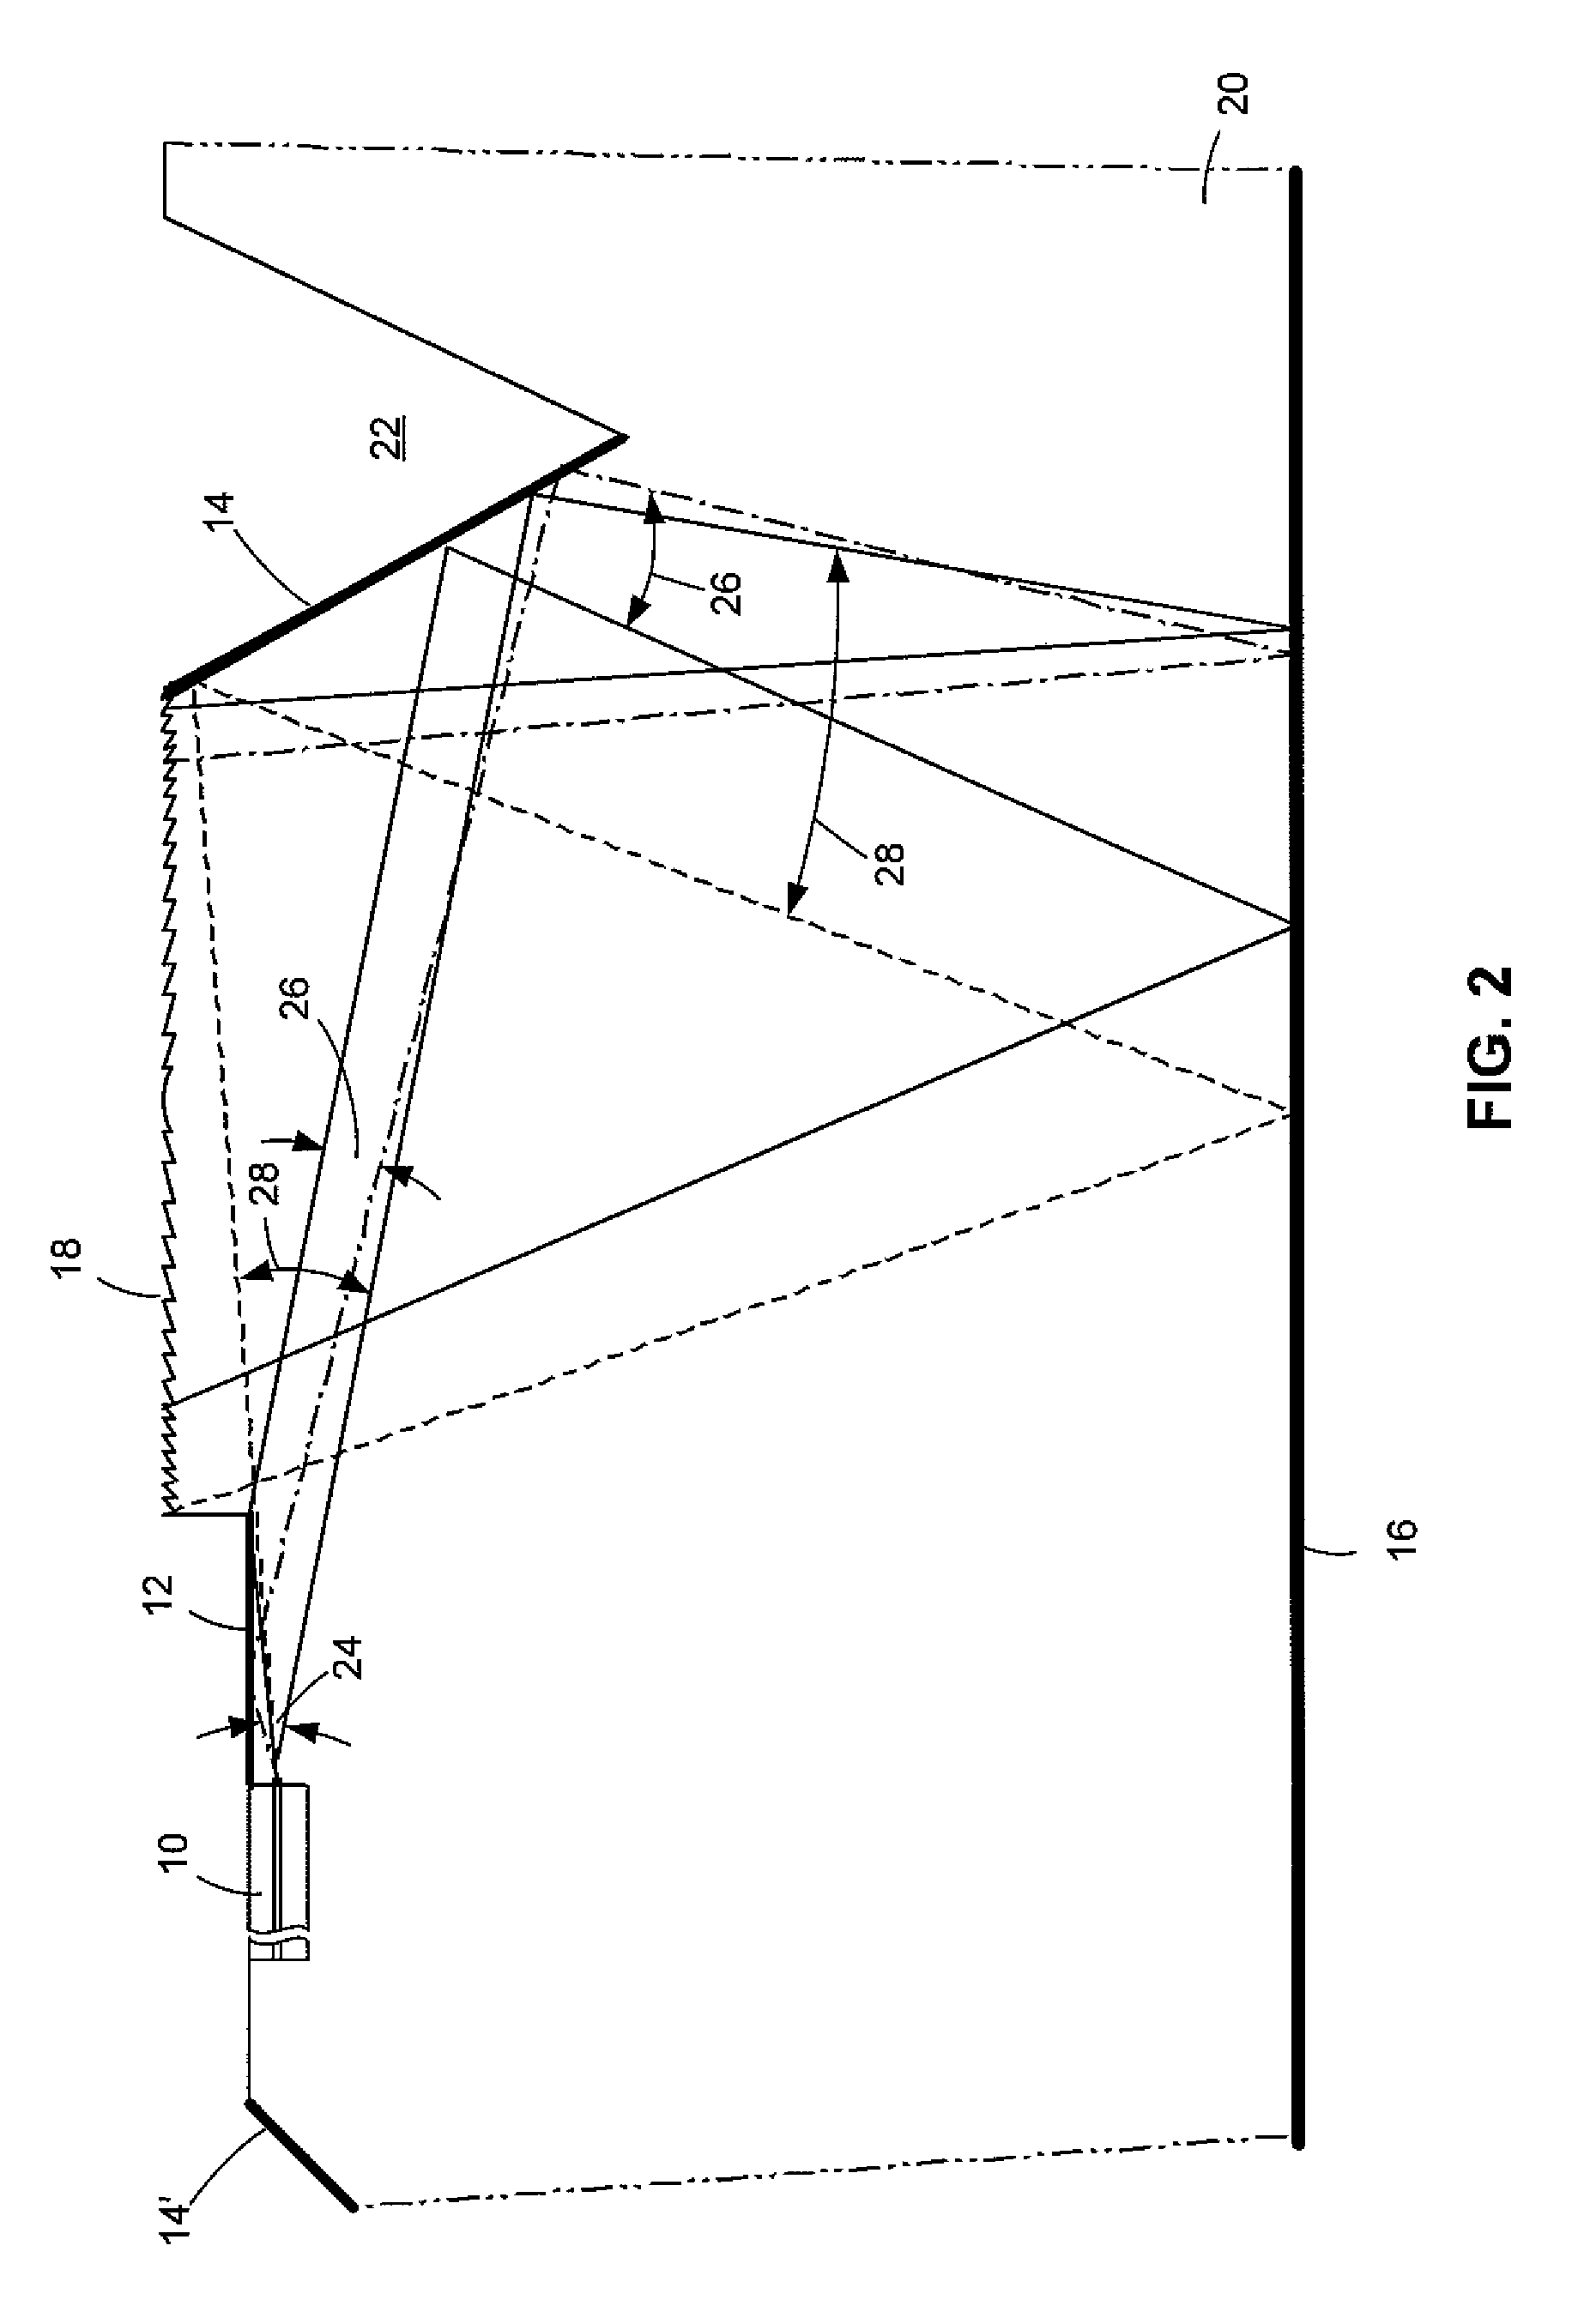 Integrated laser-diffractive lens device